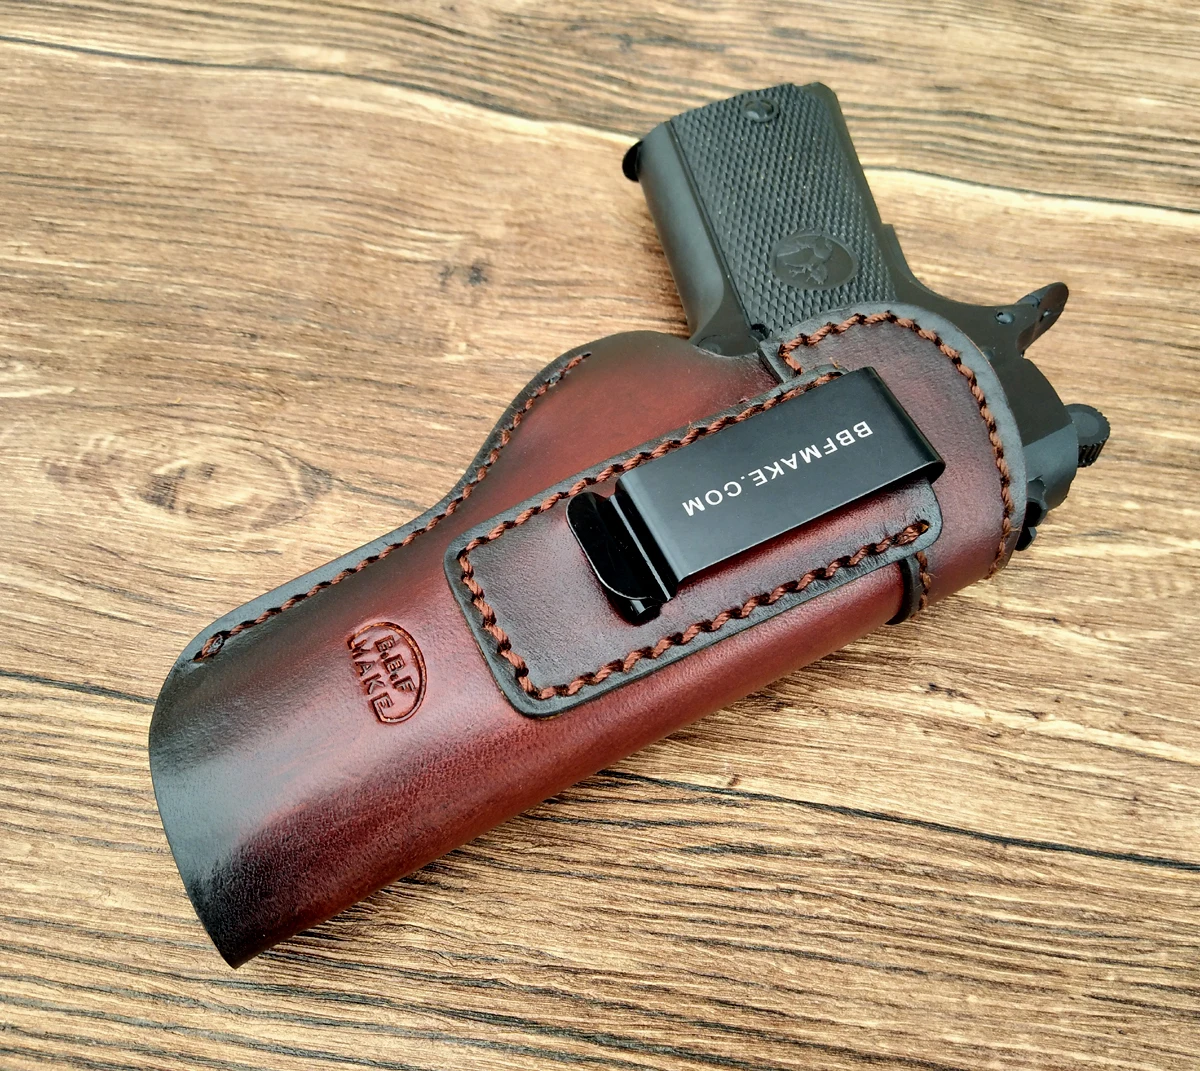 
OEM/Wholesale Tactical Gun Holster Leather For 1911 IWB Holsters Inside Waistband Concealed Gun Accessories Gun Bag Red-Brown 